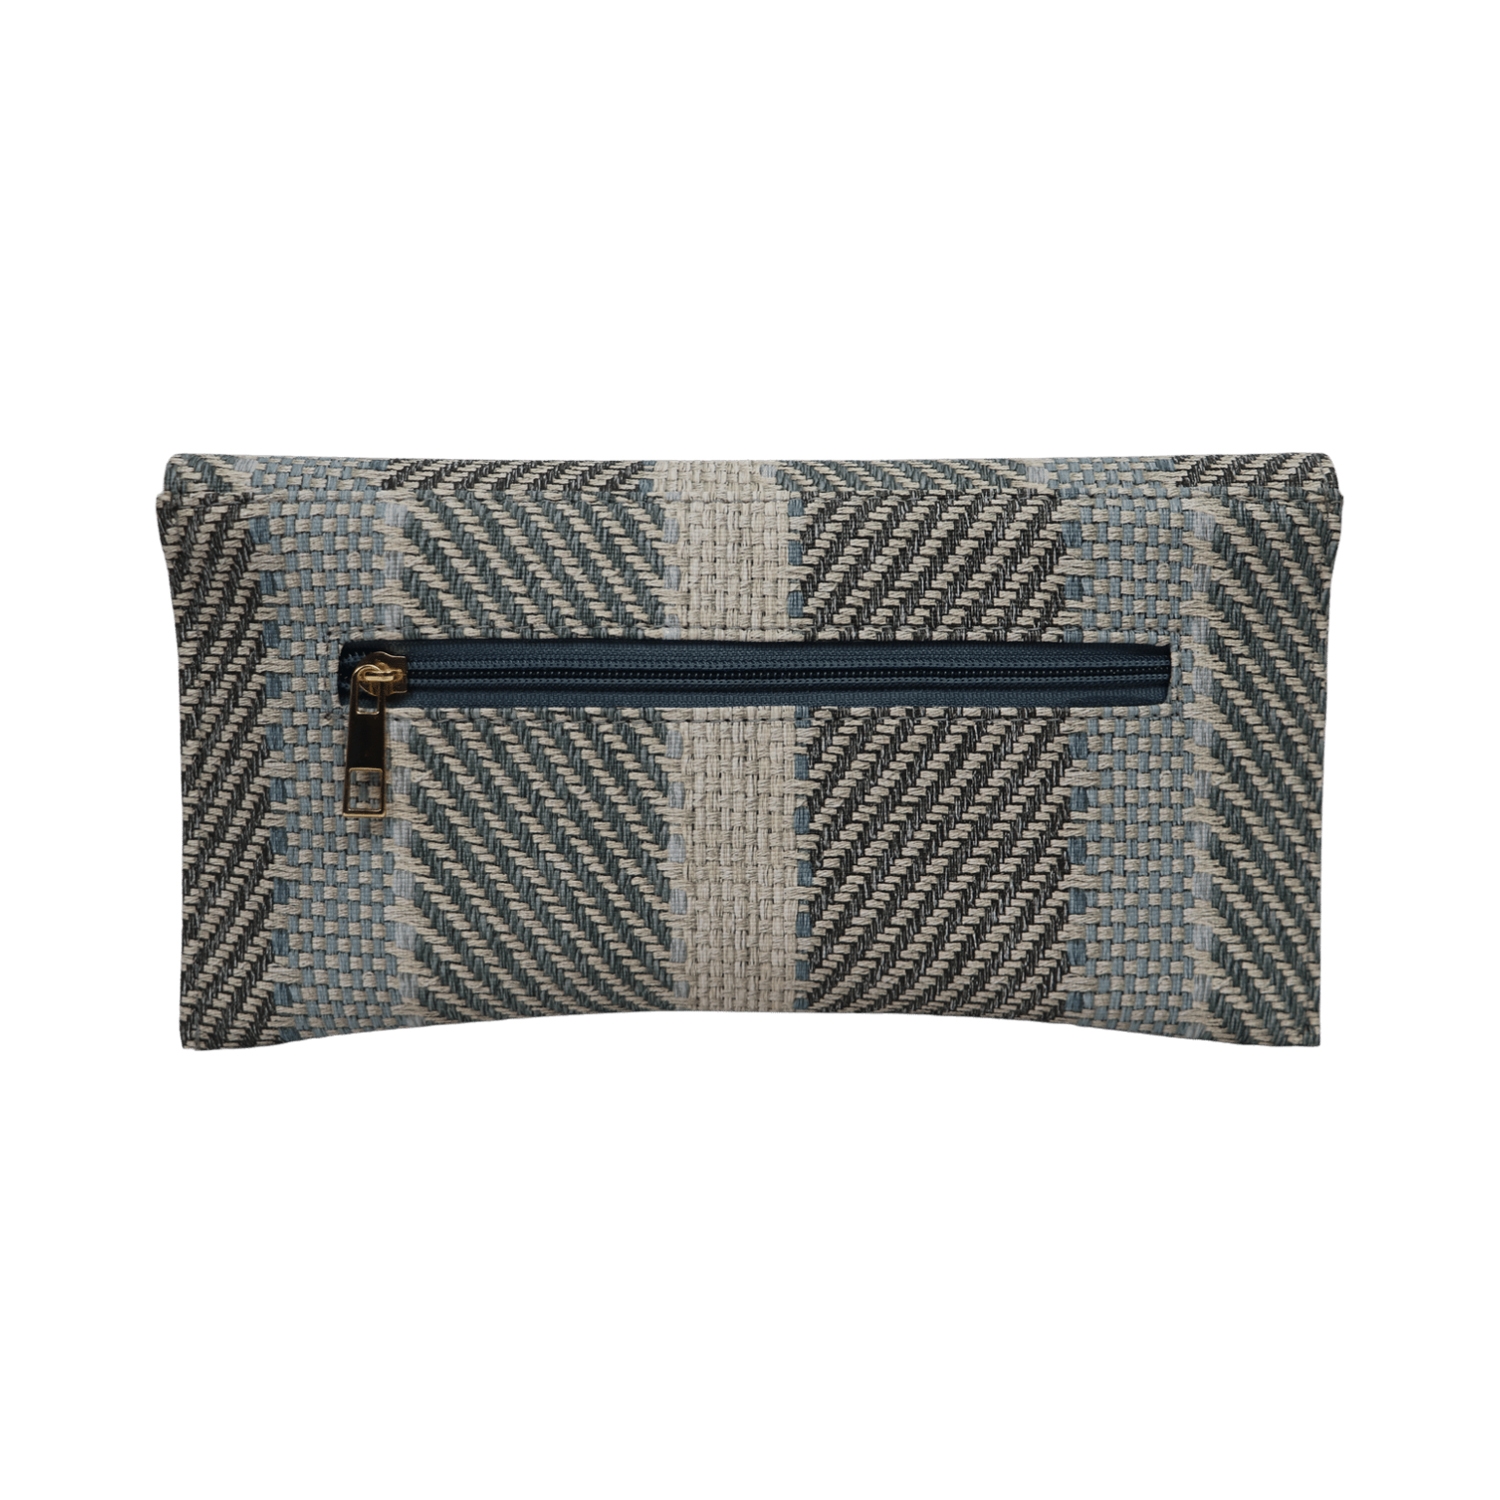 EMM | Printed casual clutch with a detachable chain for women 1